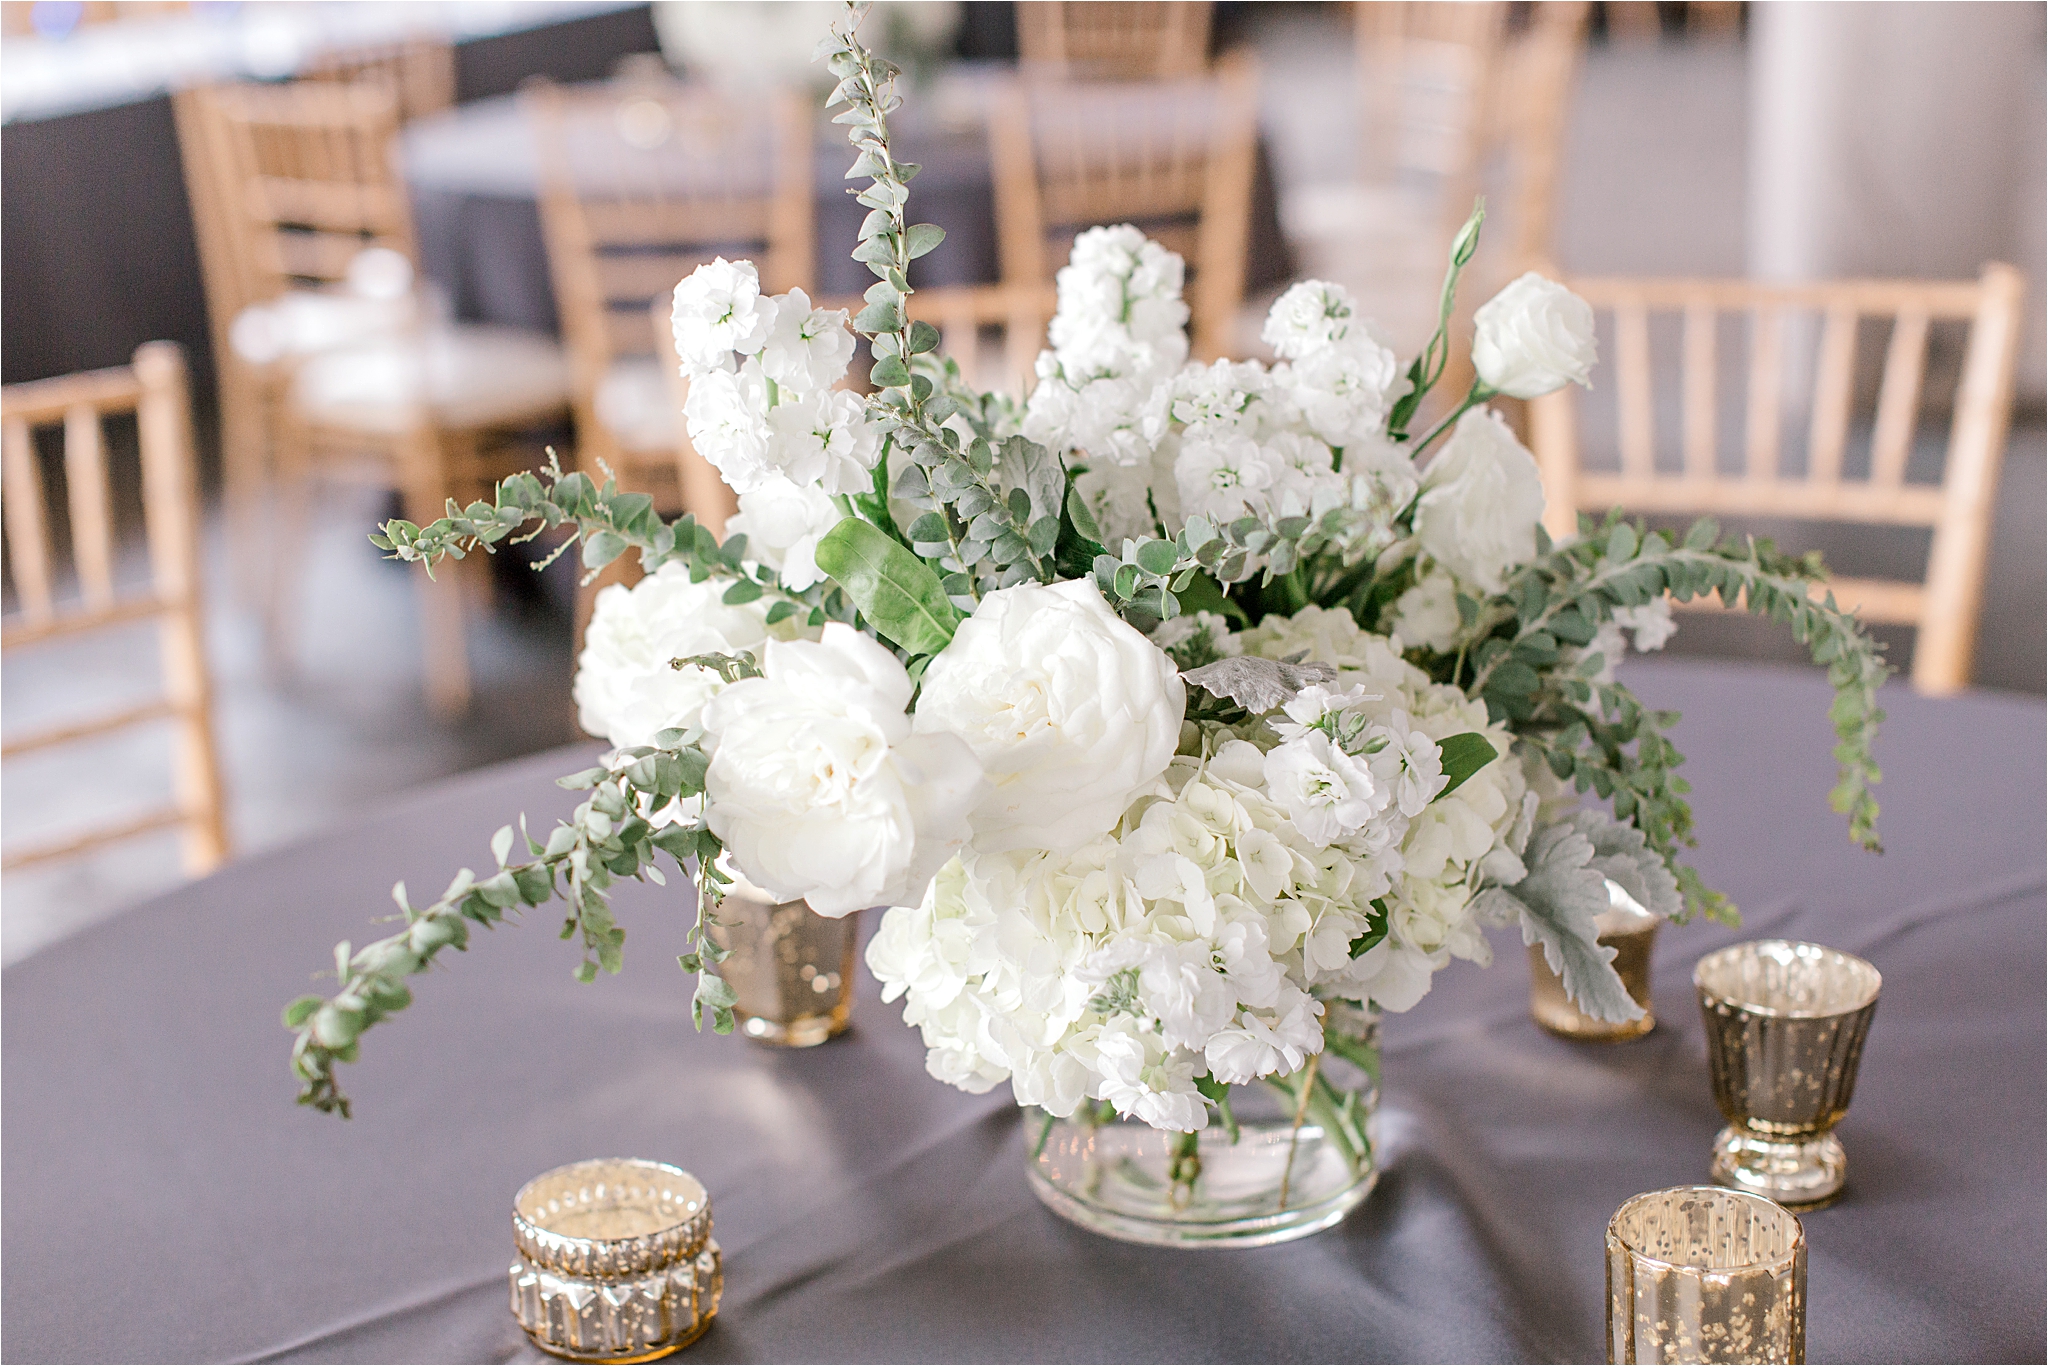 white and green neutral wedding centerpieces by we are wildflowers